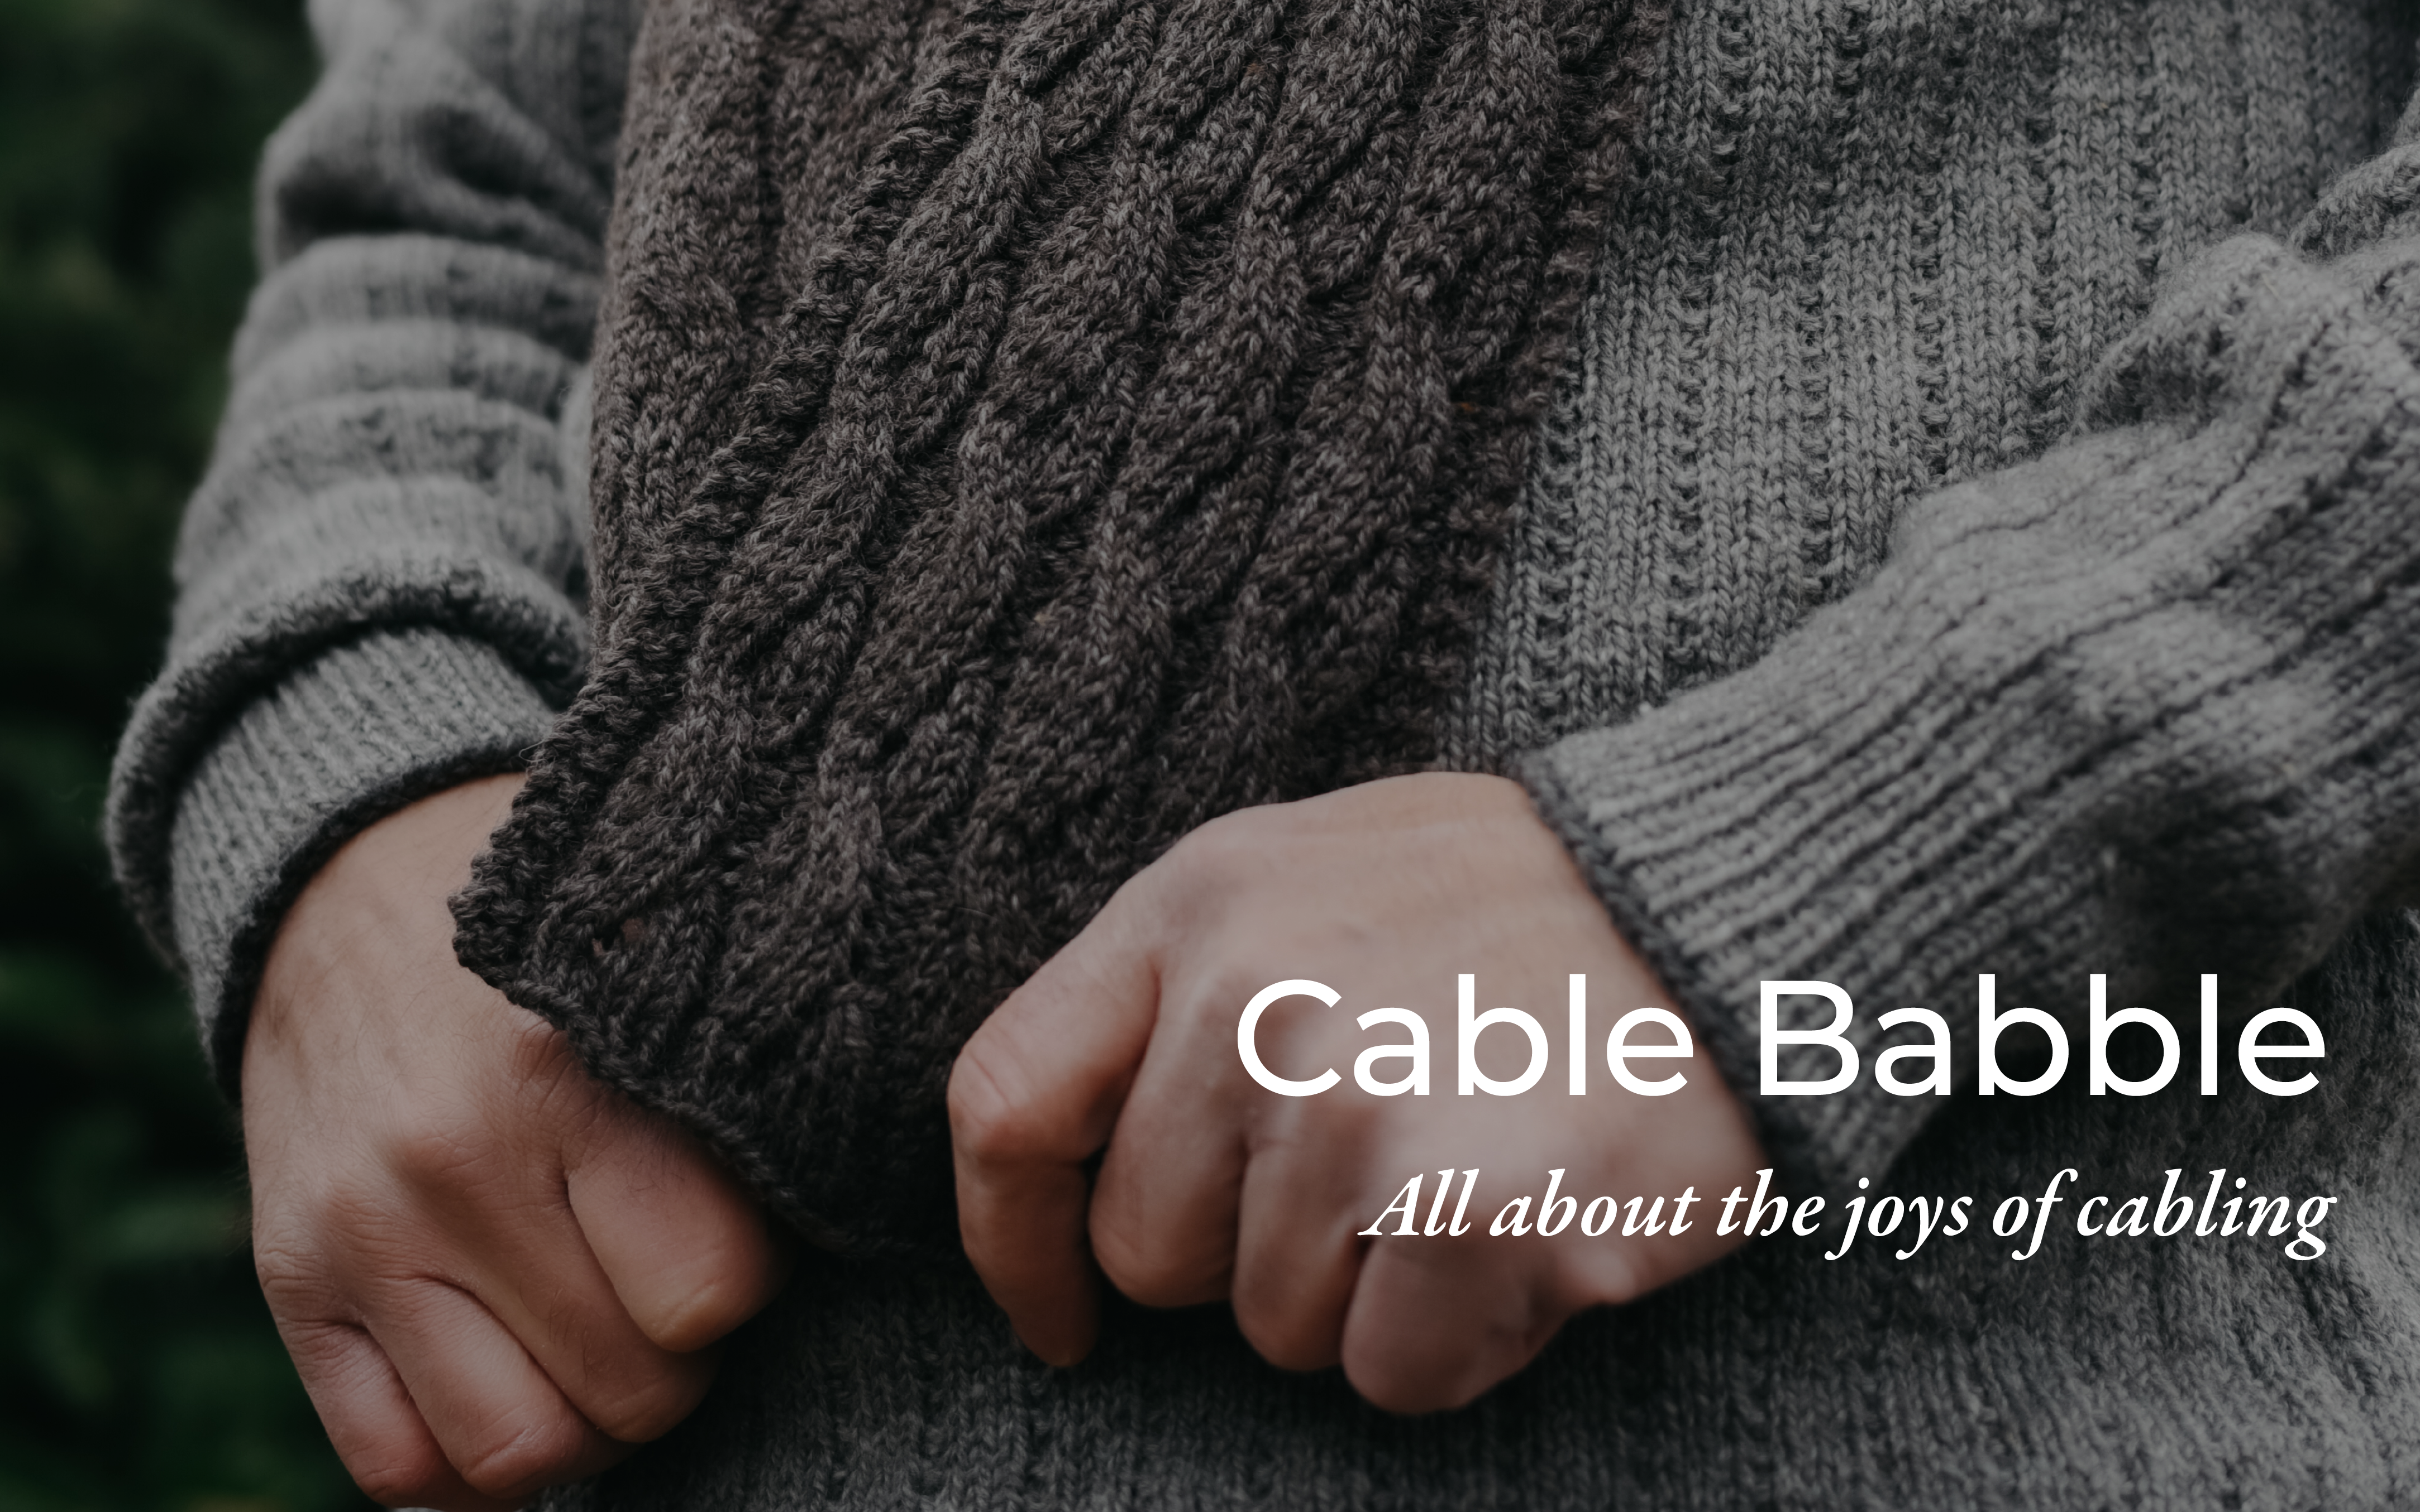 Cable Babble